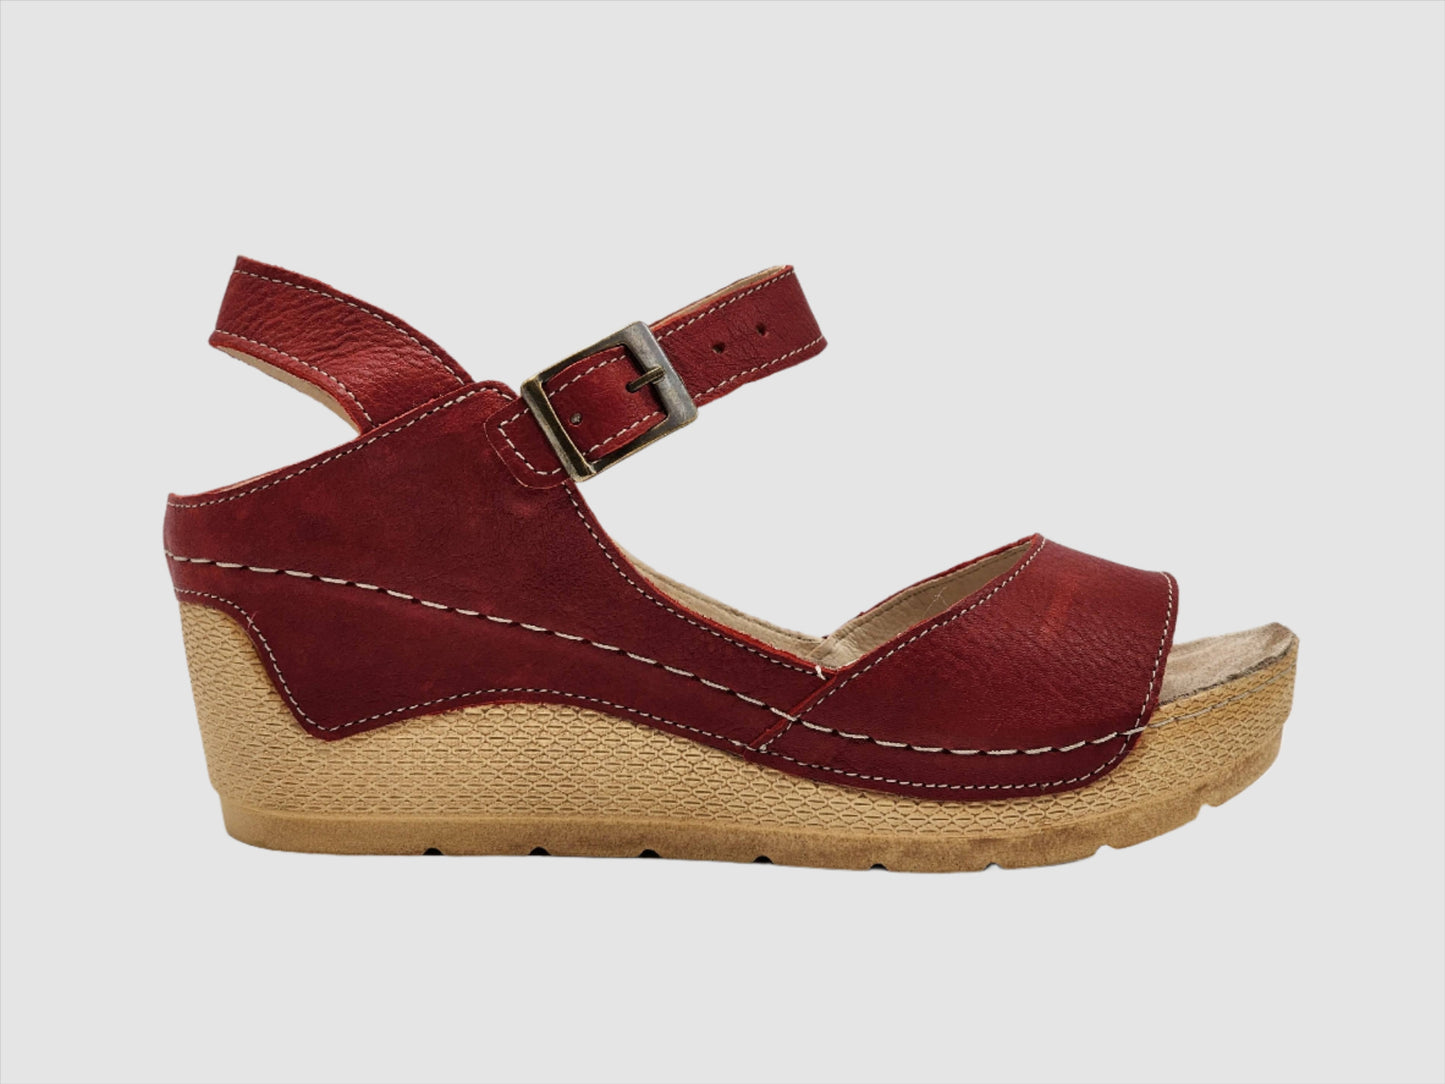 [Women's Red Leather Sandals] - Kacper Global Shoes 